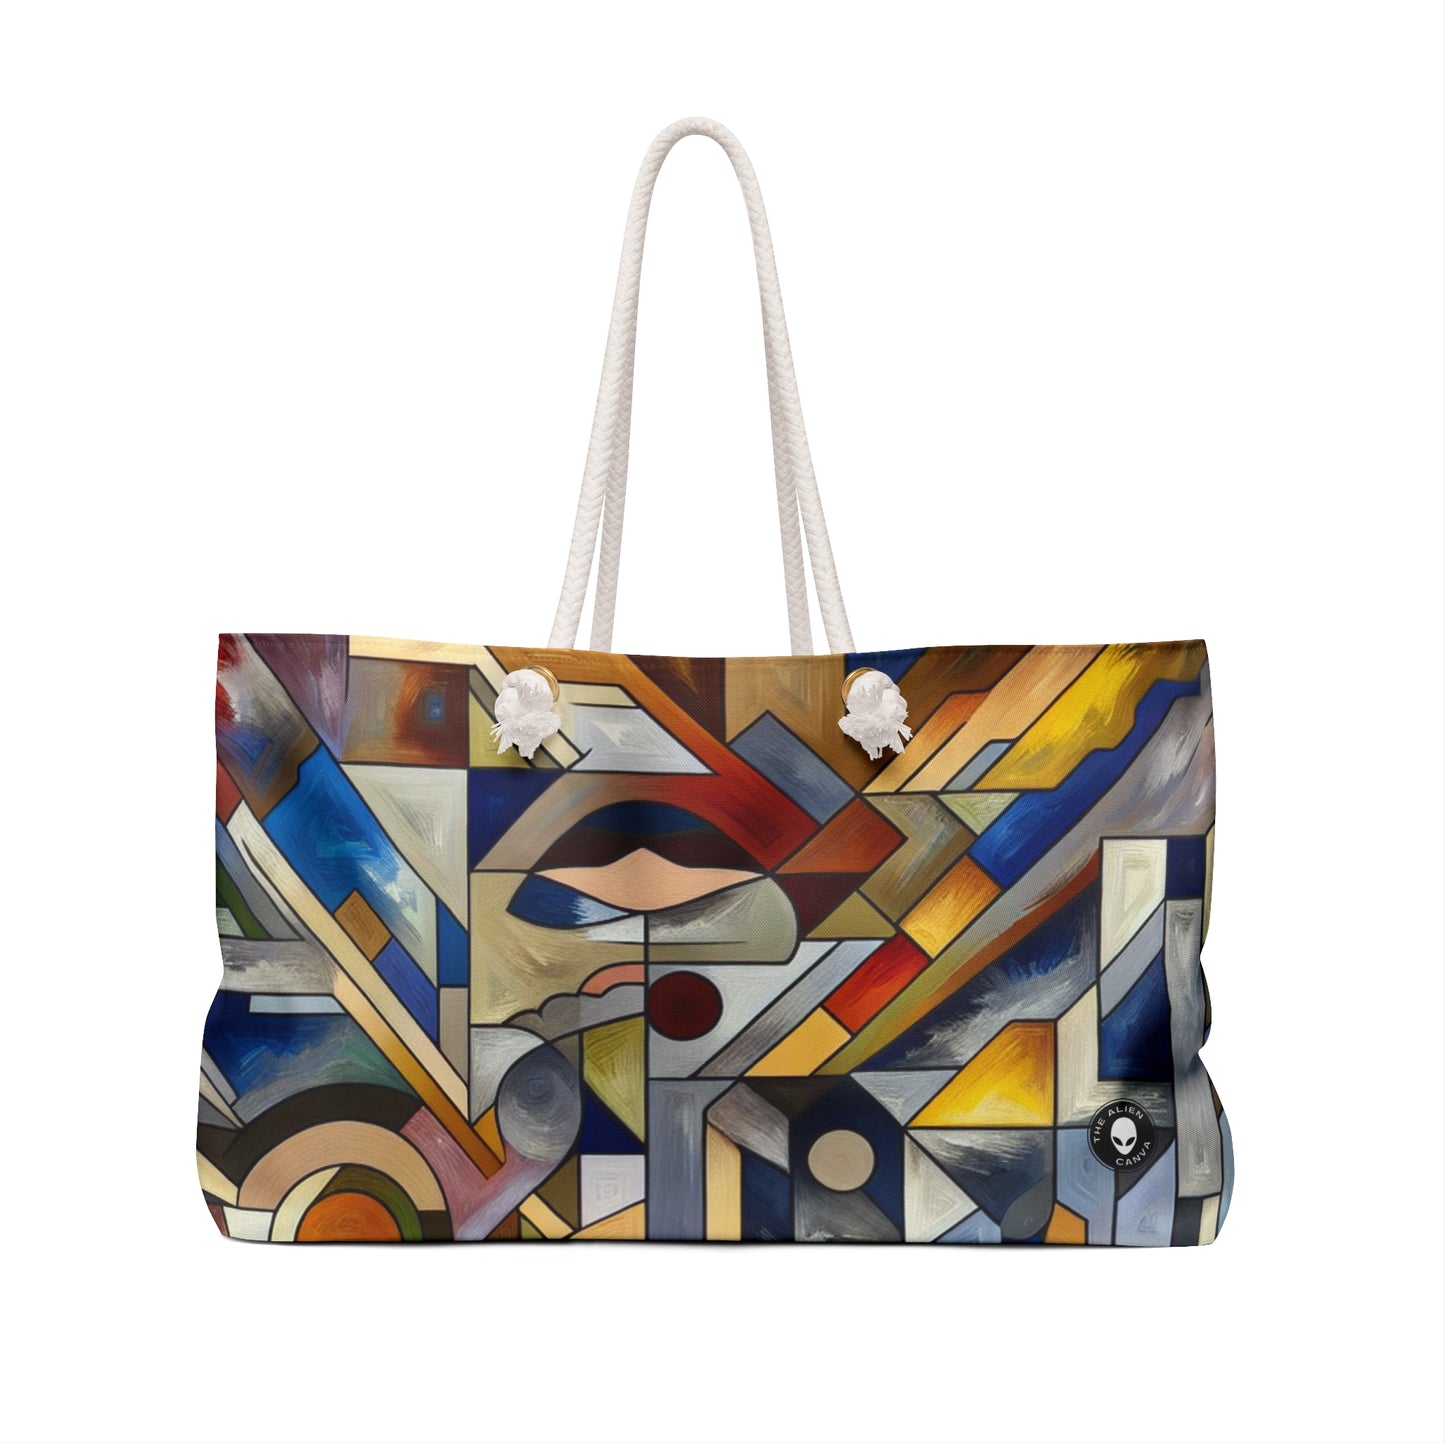 "Urban Fragmentation: An Analytical Cubist Cityscape" - The Alien Weekender Bag Analytical Cubism